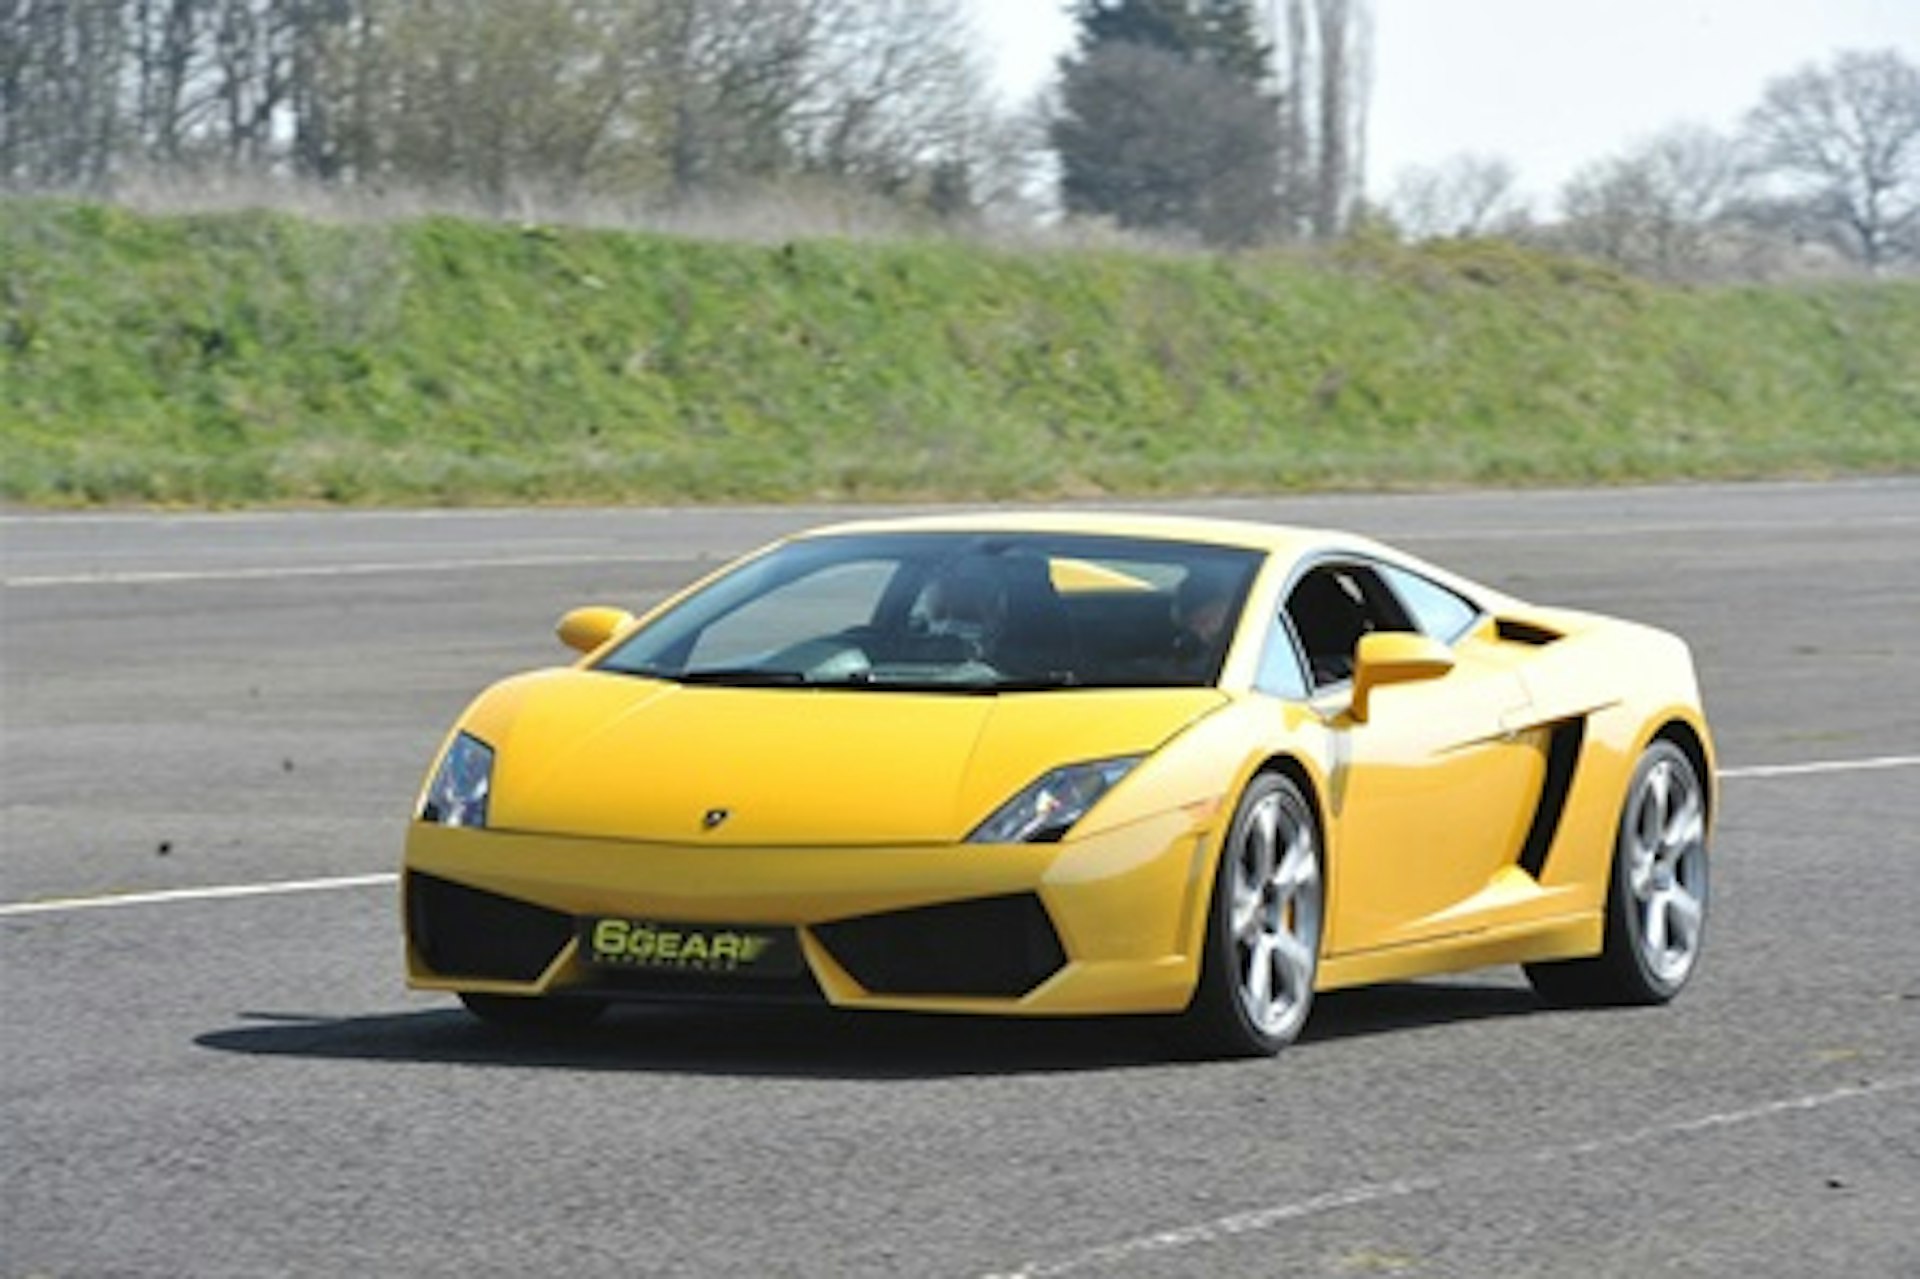 Double Supercar Blast with Demo Lap, Photo and Breakfast at Stafford Driving Centre 1